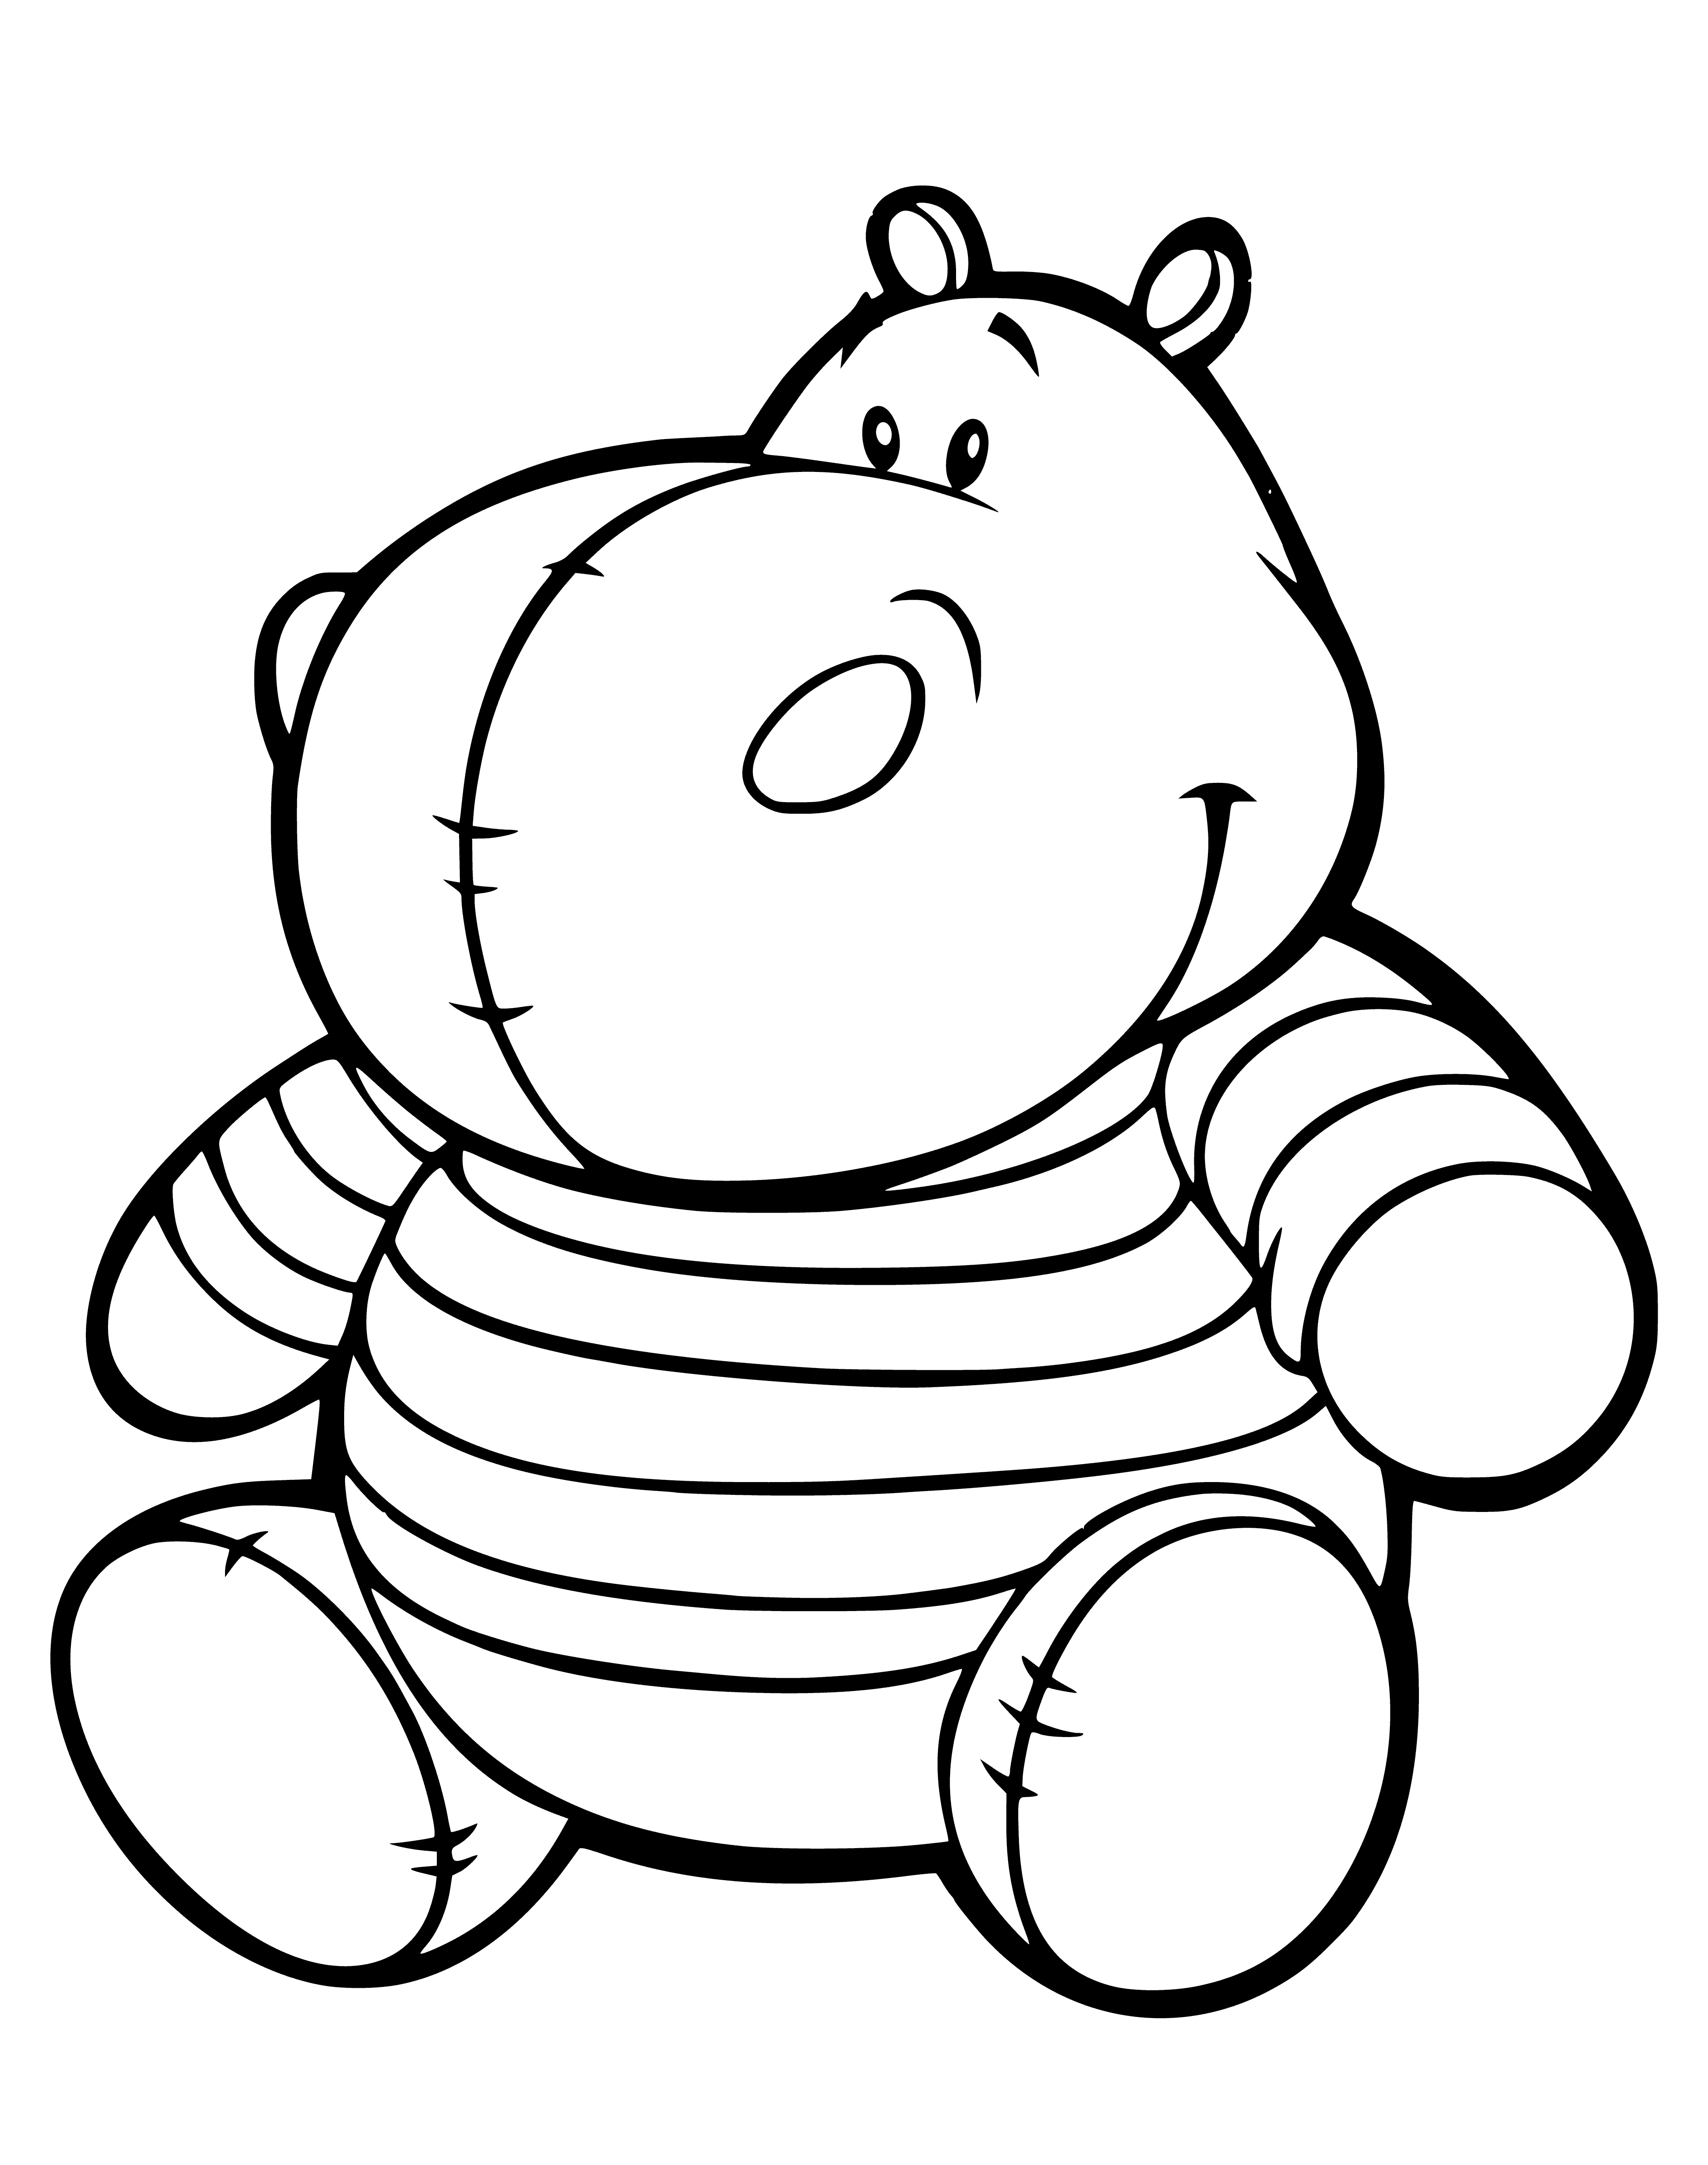 coloring page: Cuddly hippo toy perfect for hugs; sure to be any kid's favorite! Soft, plush material perfect for snuggling.